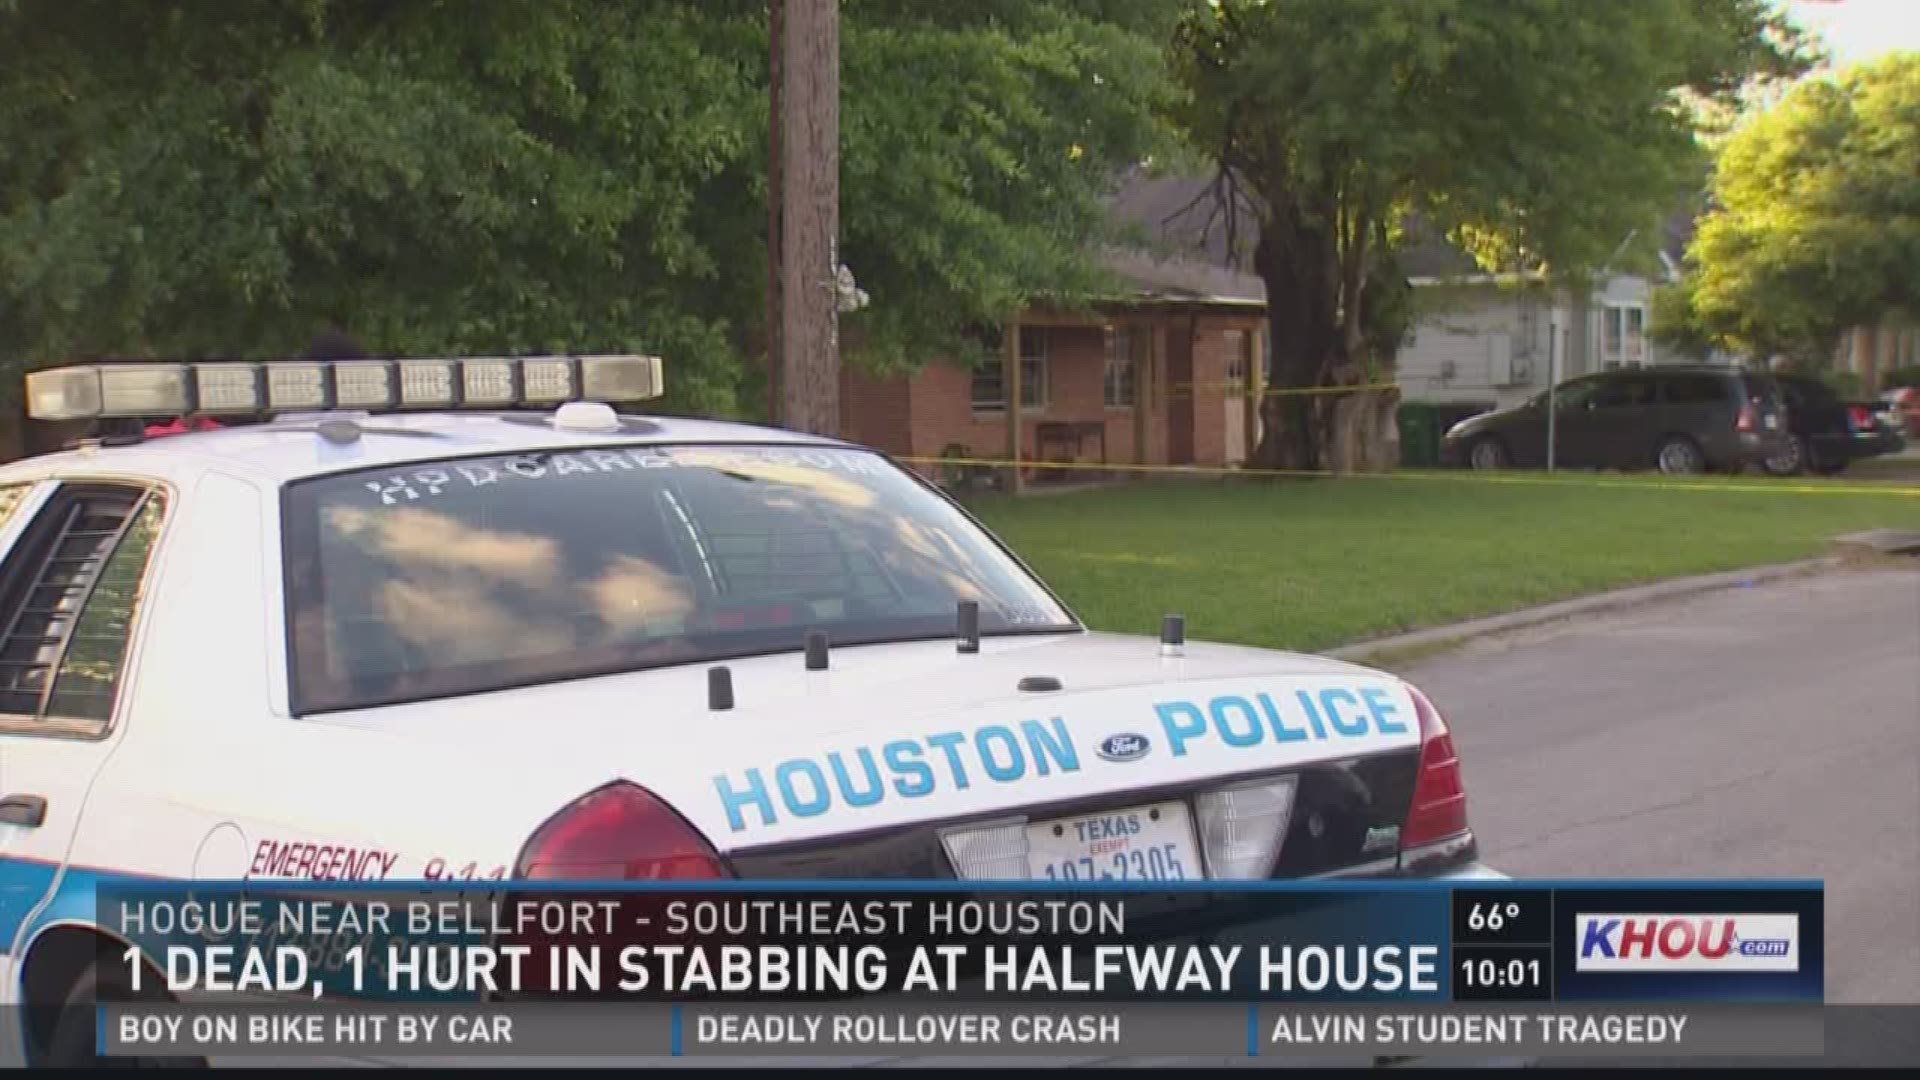 One person is dead and two others were injured in a stabbing in south Houston on Saturday, according to Houston Police.